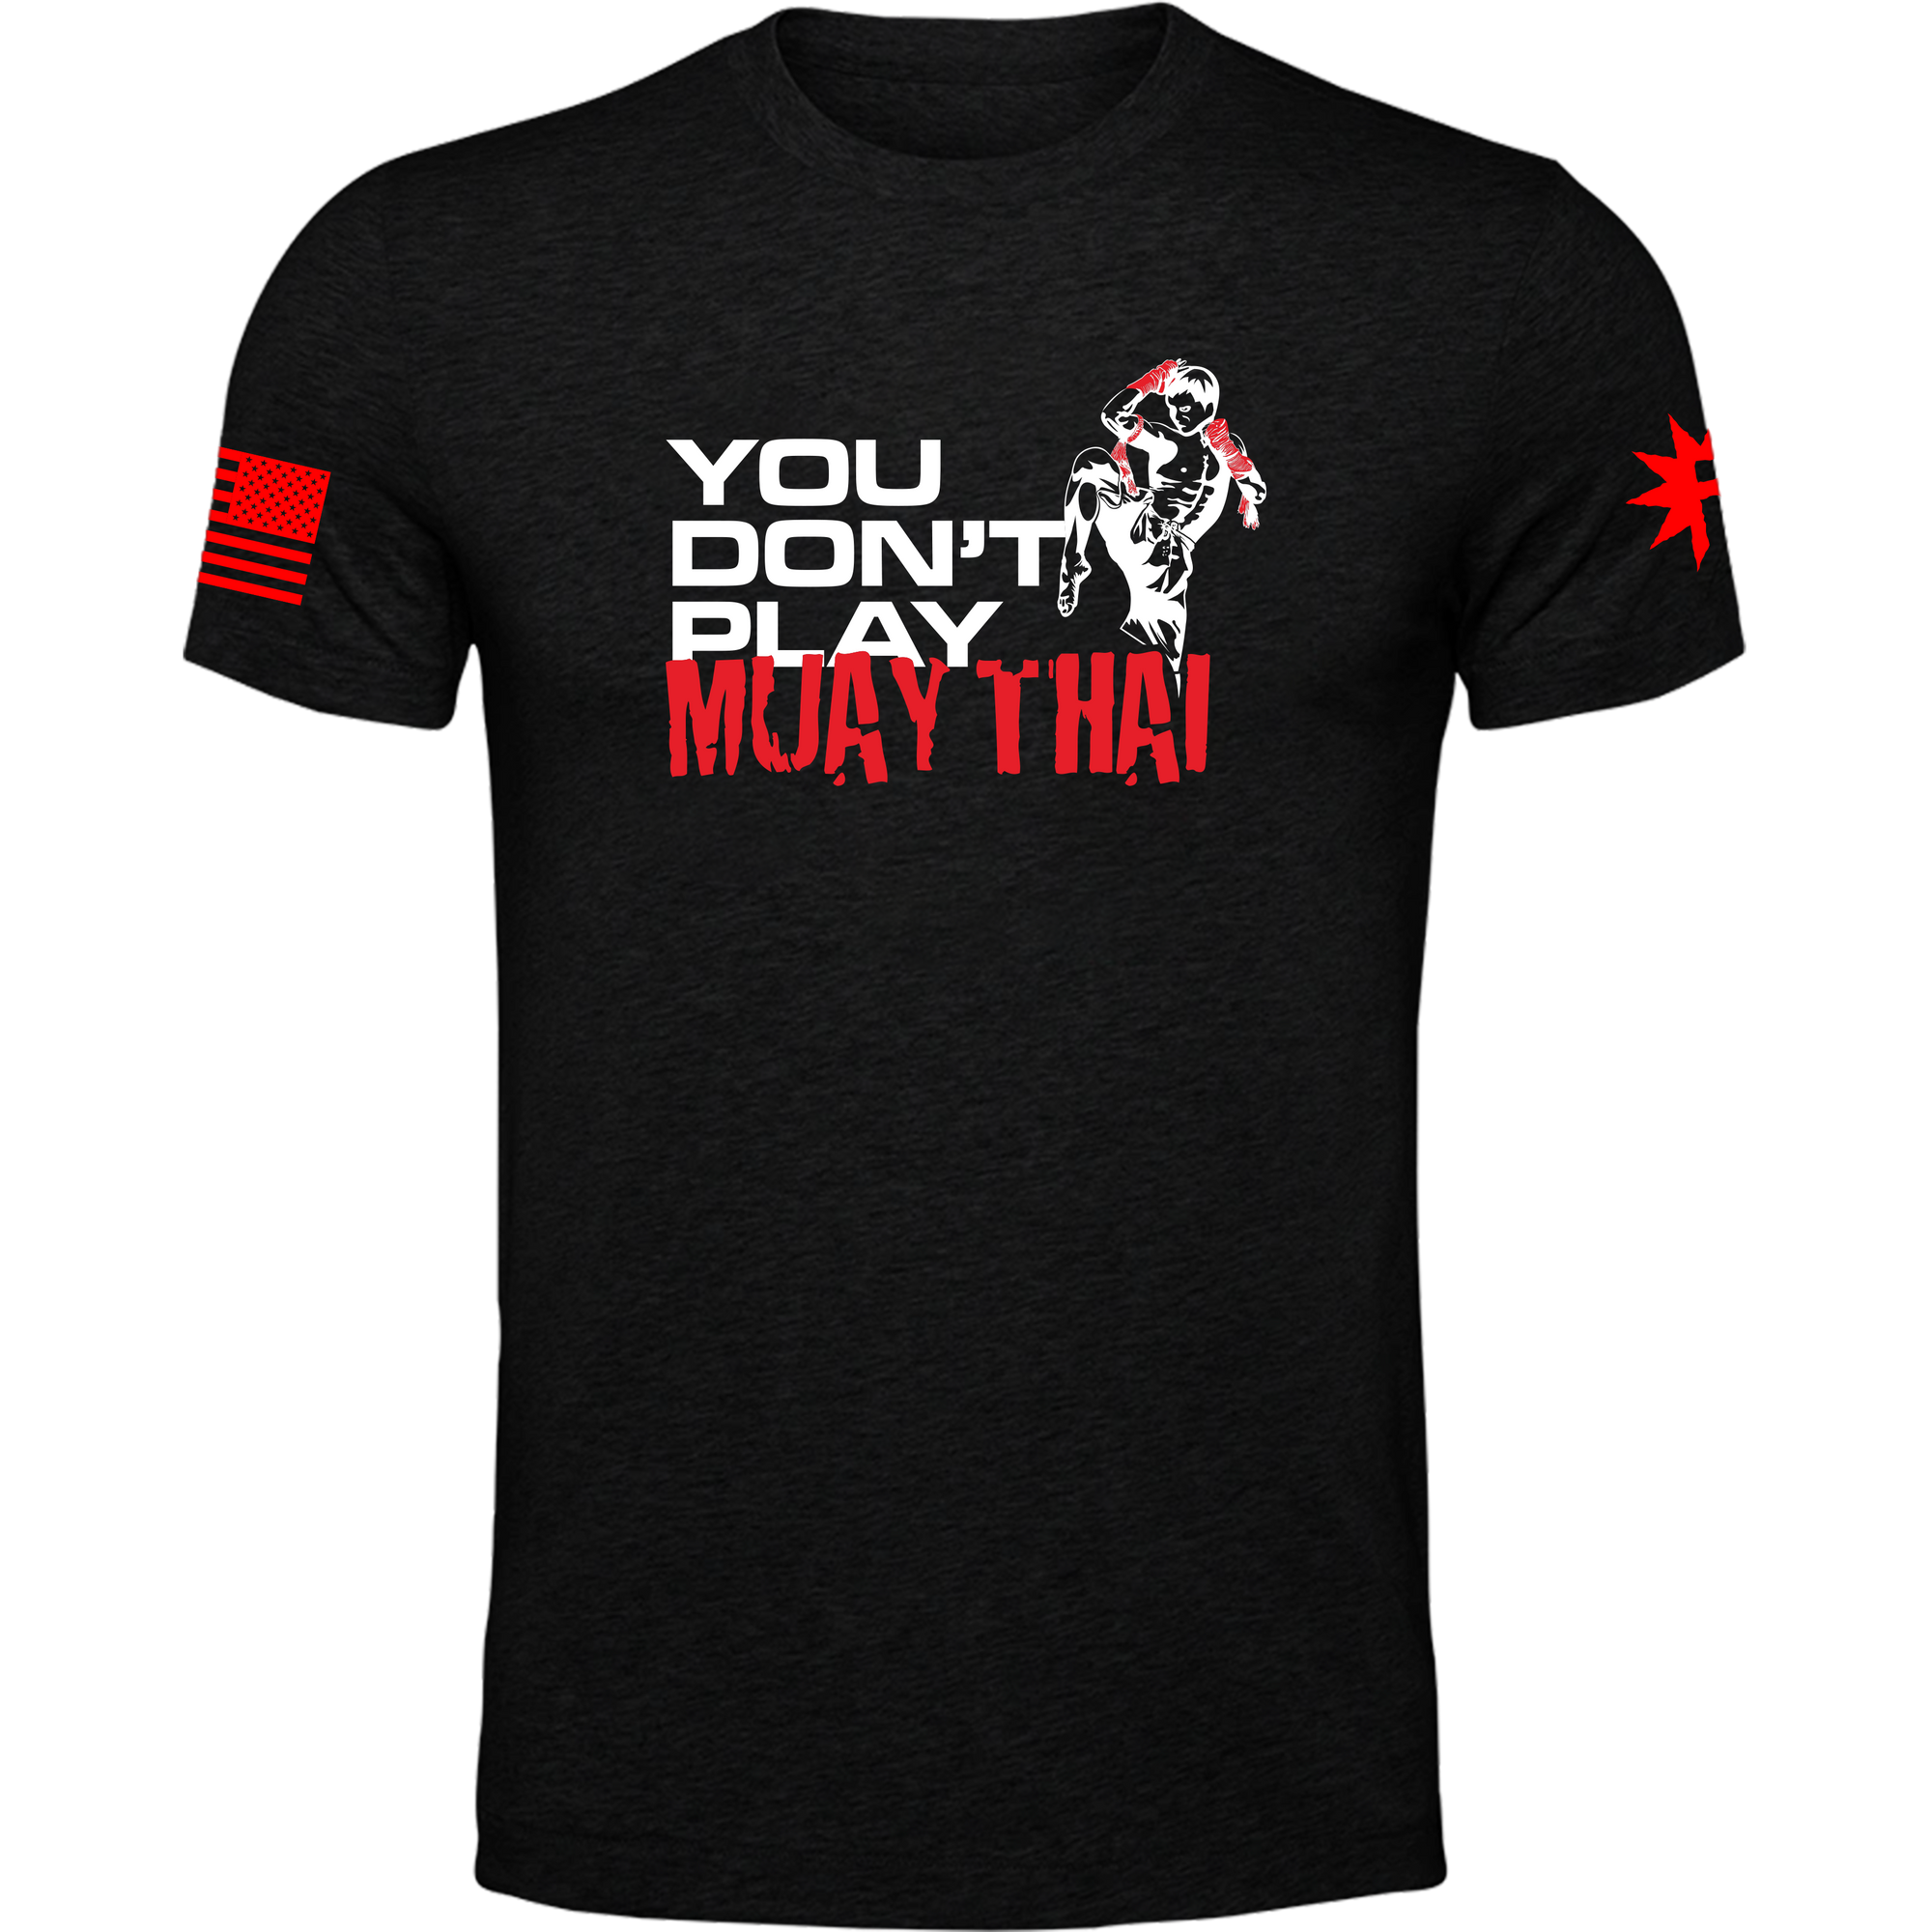 You Don't Play Muay Thai Tee